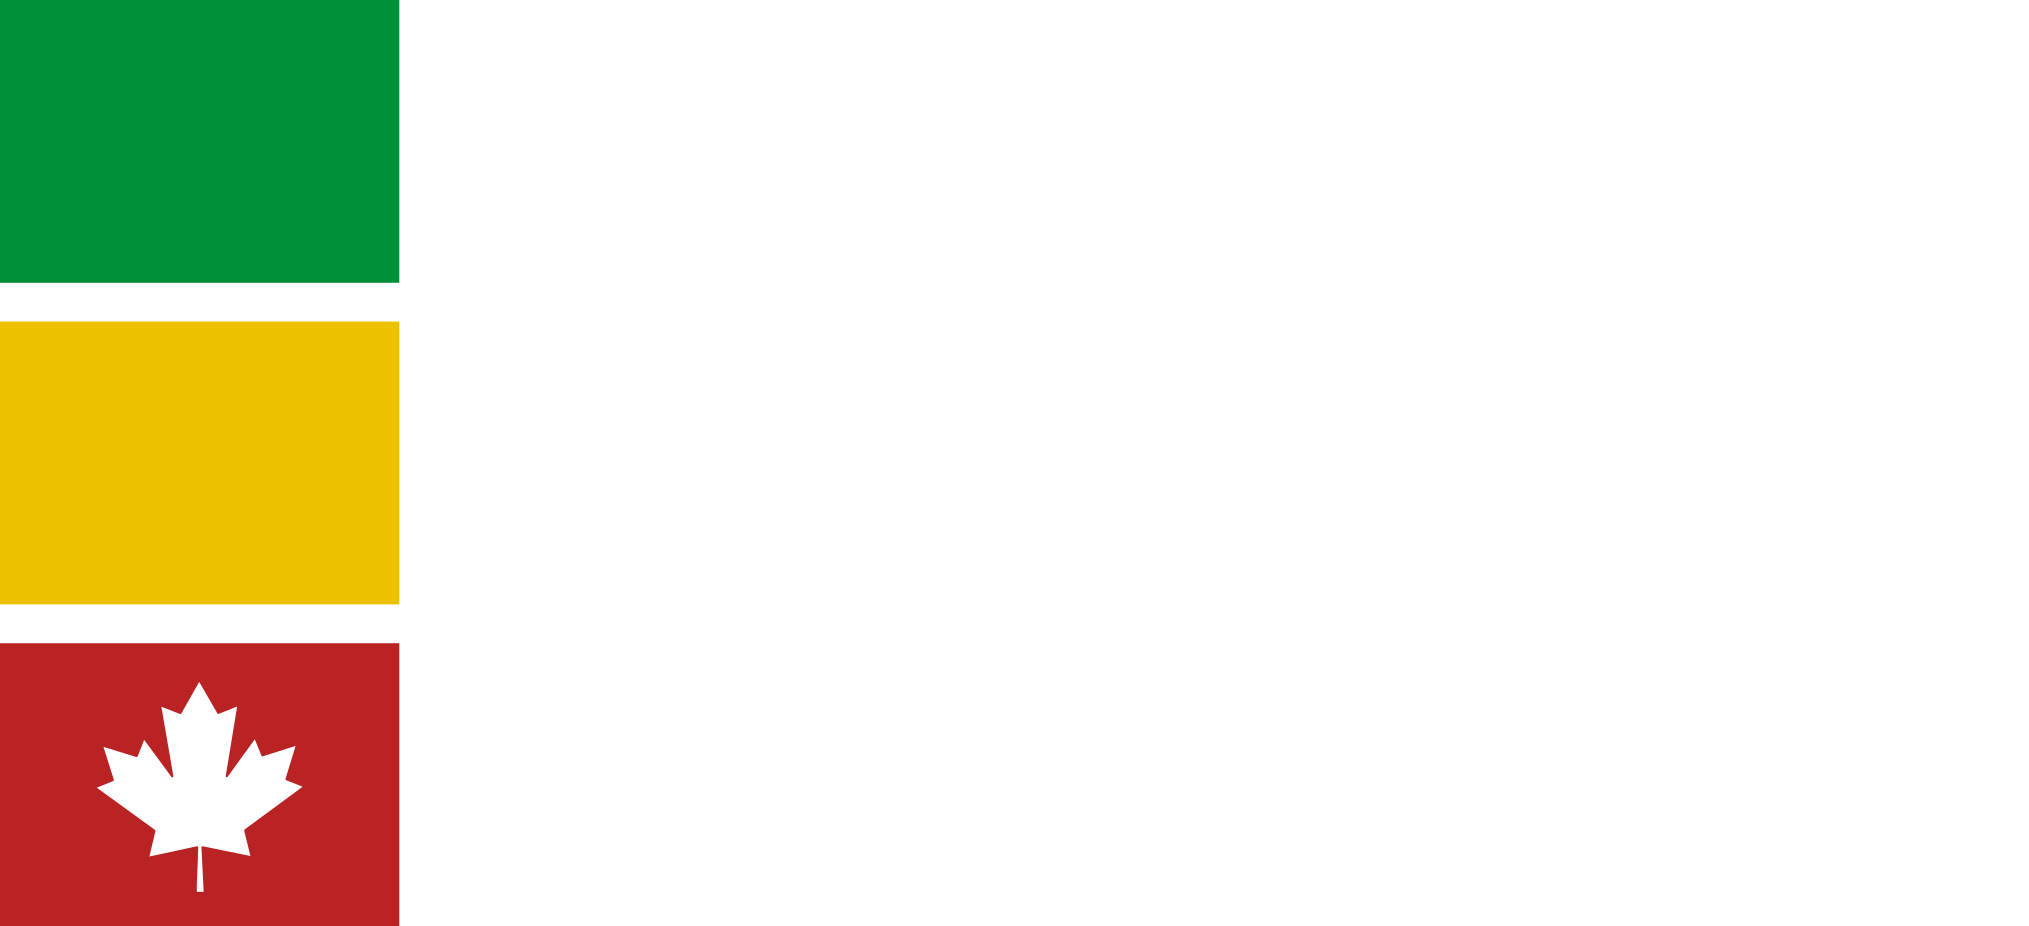 Lean Excellence Canada